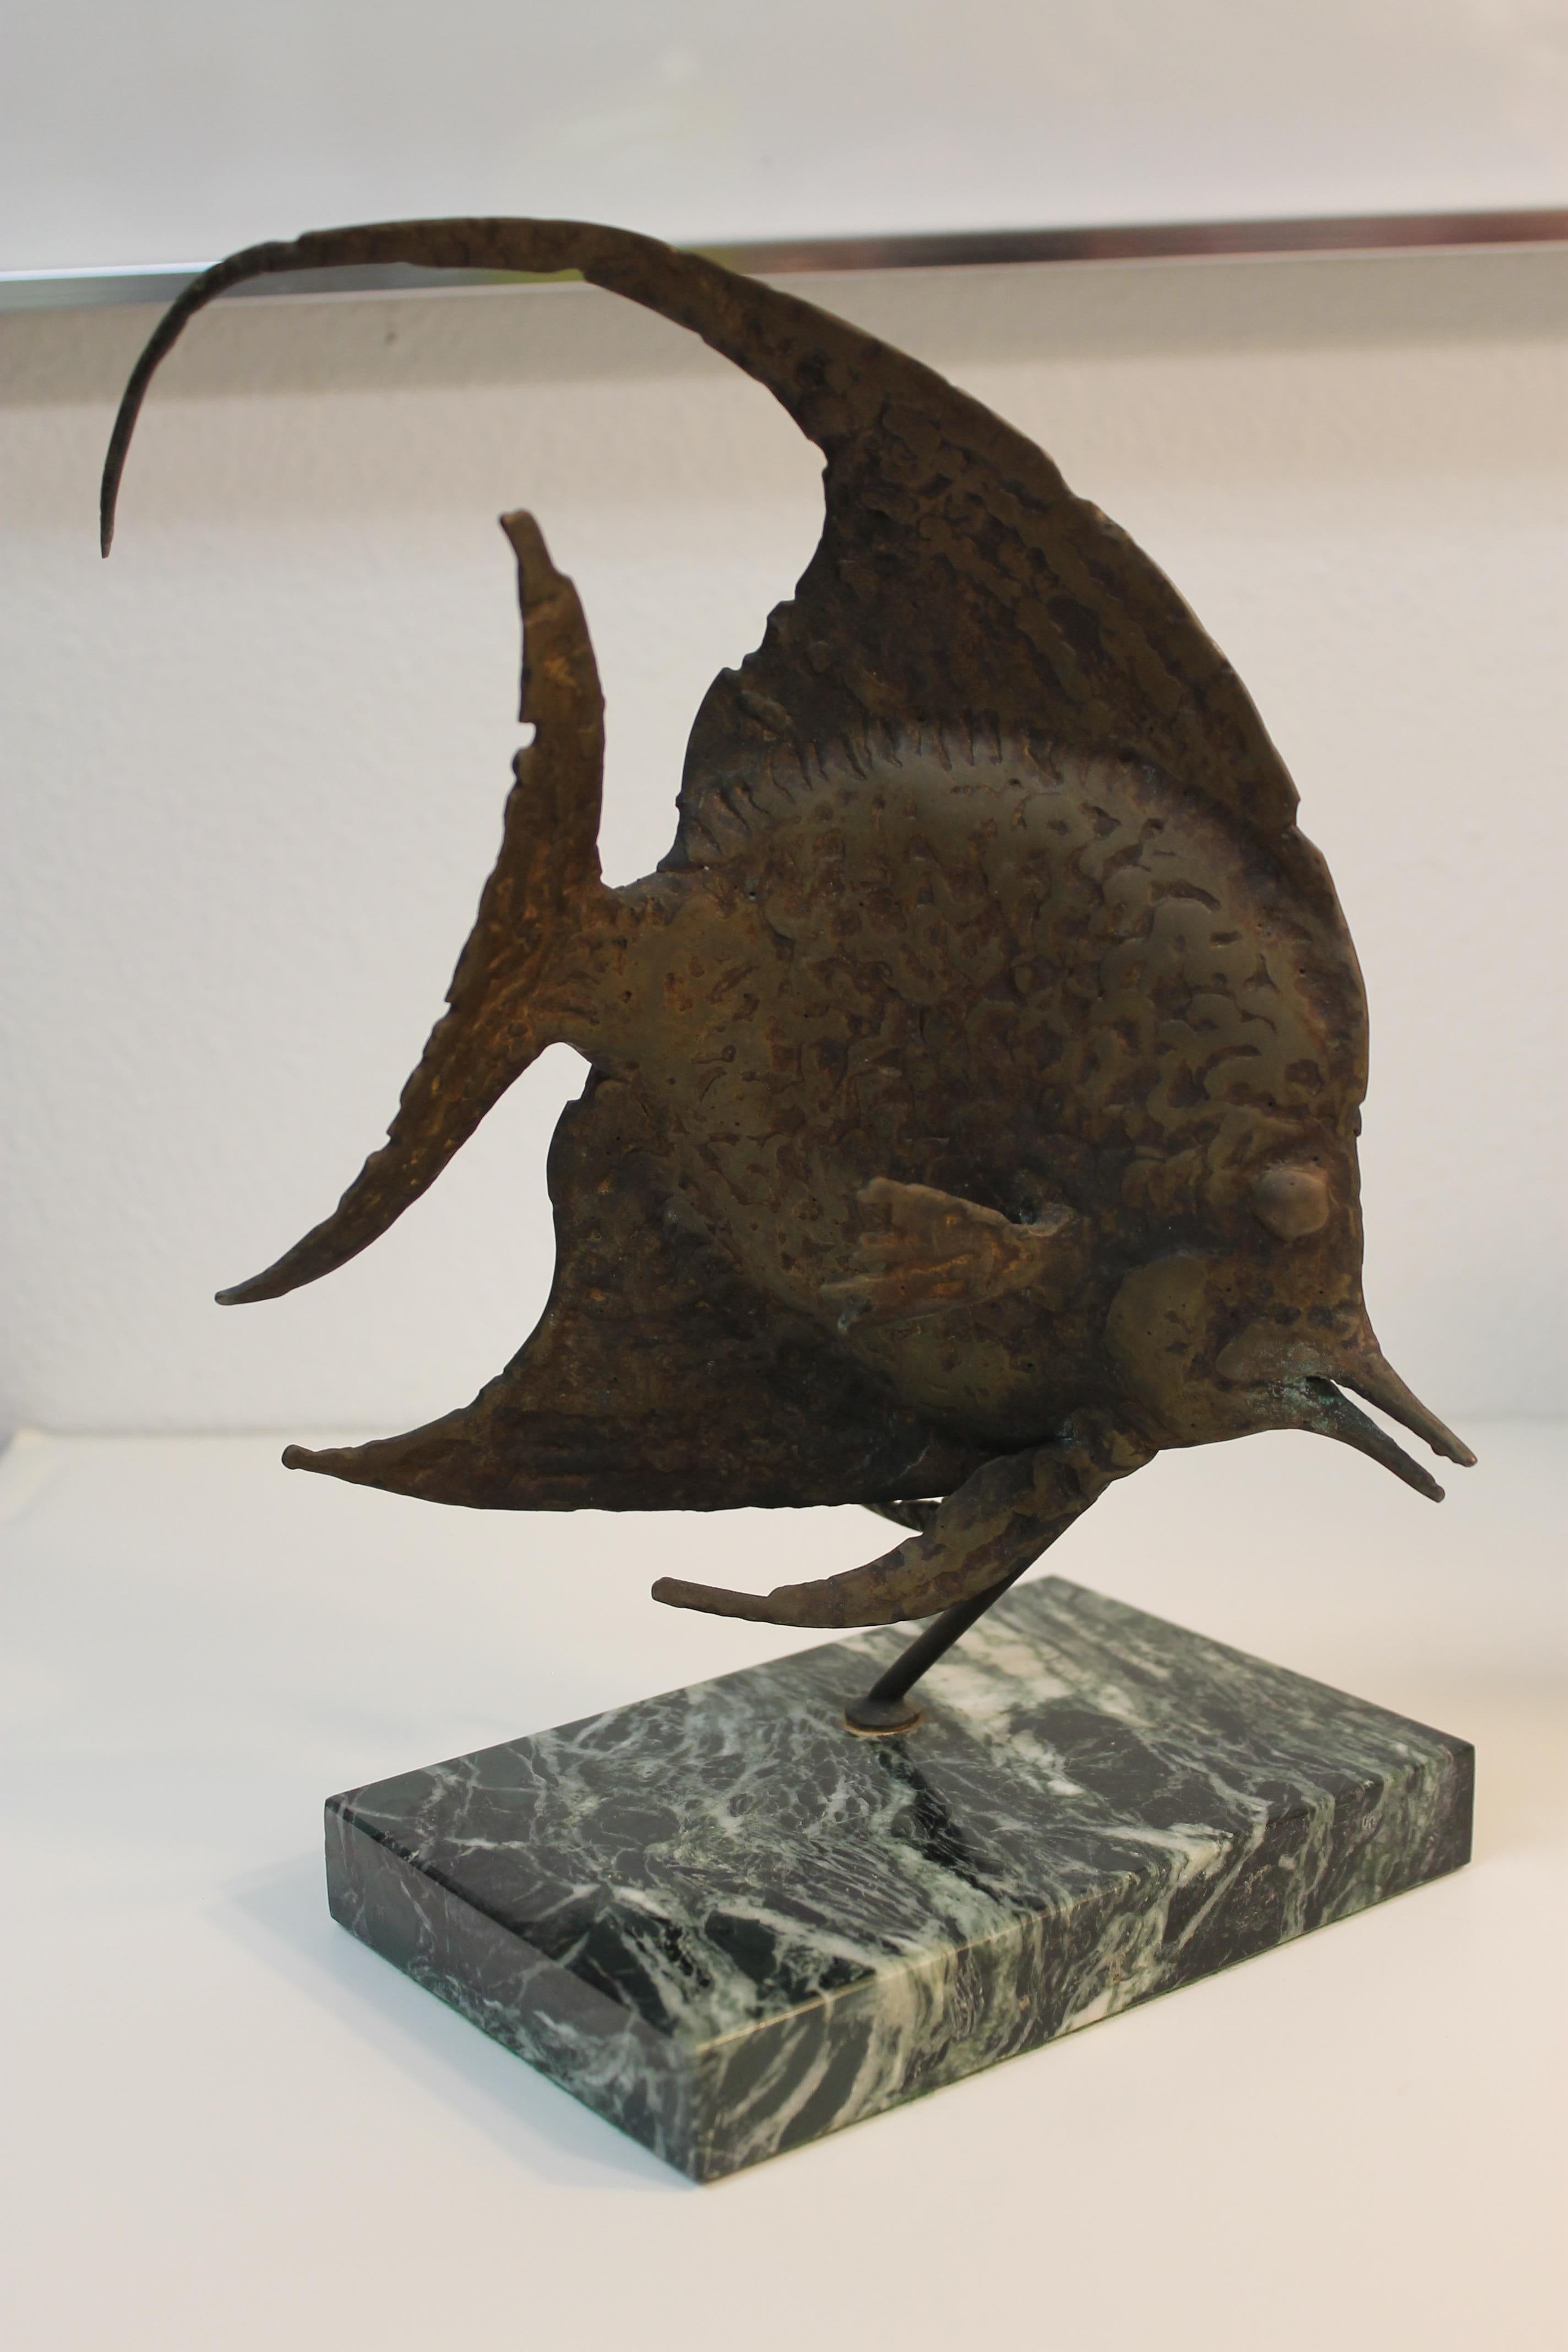 Bronze angel fish sculpture signed G. TATE on marble stand. Fish sculpture on stand measures 7